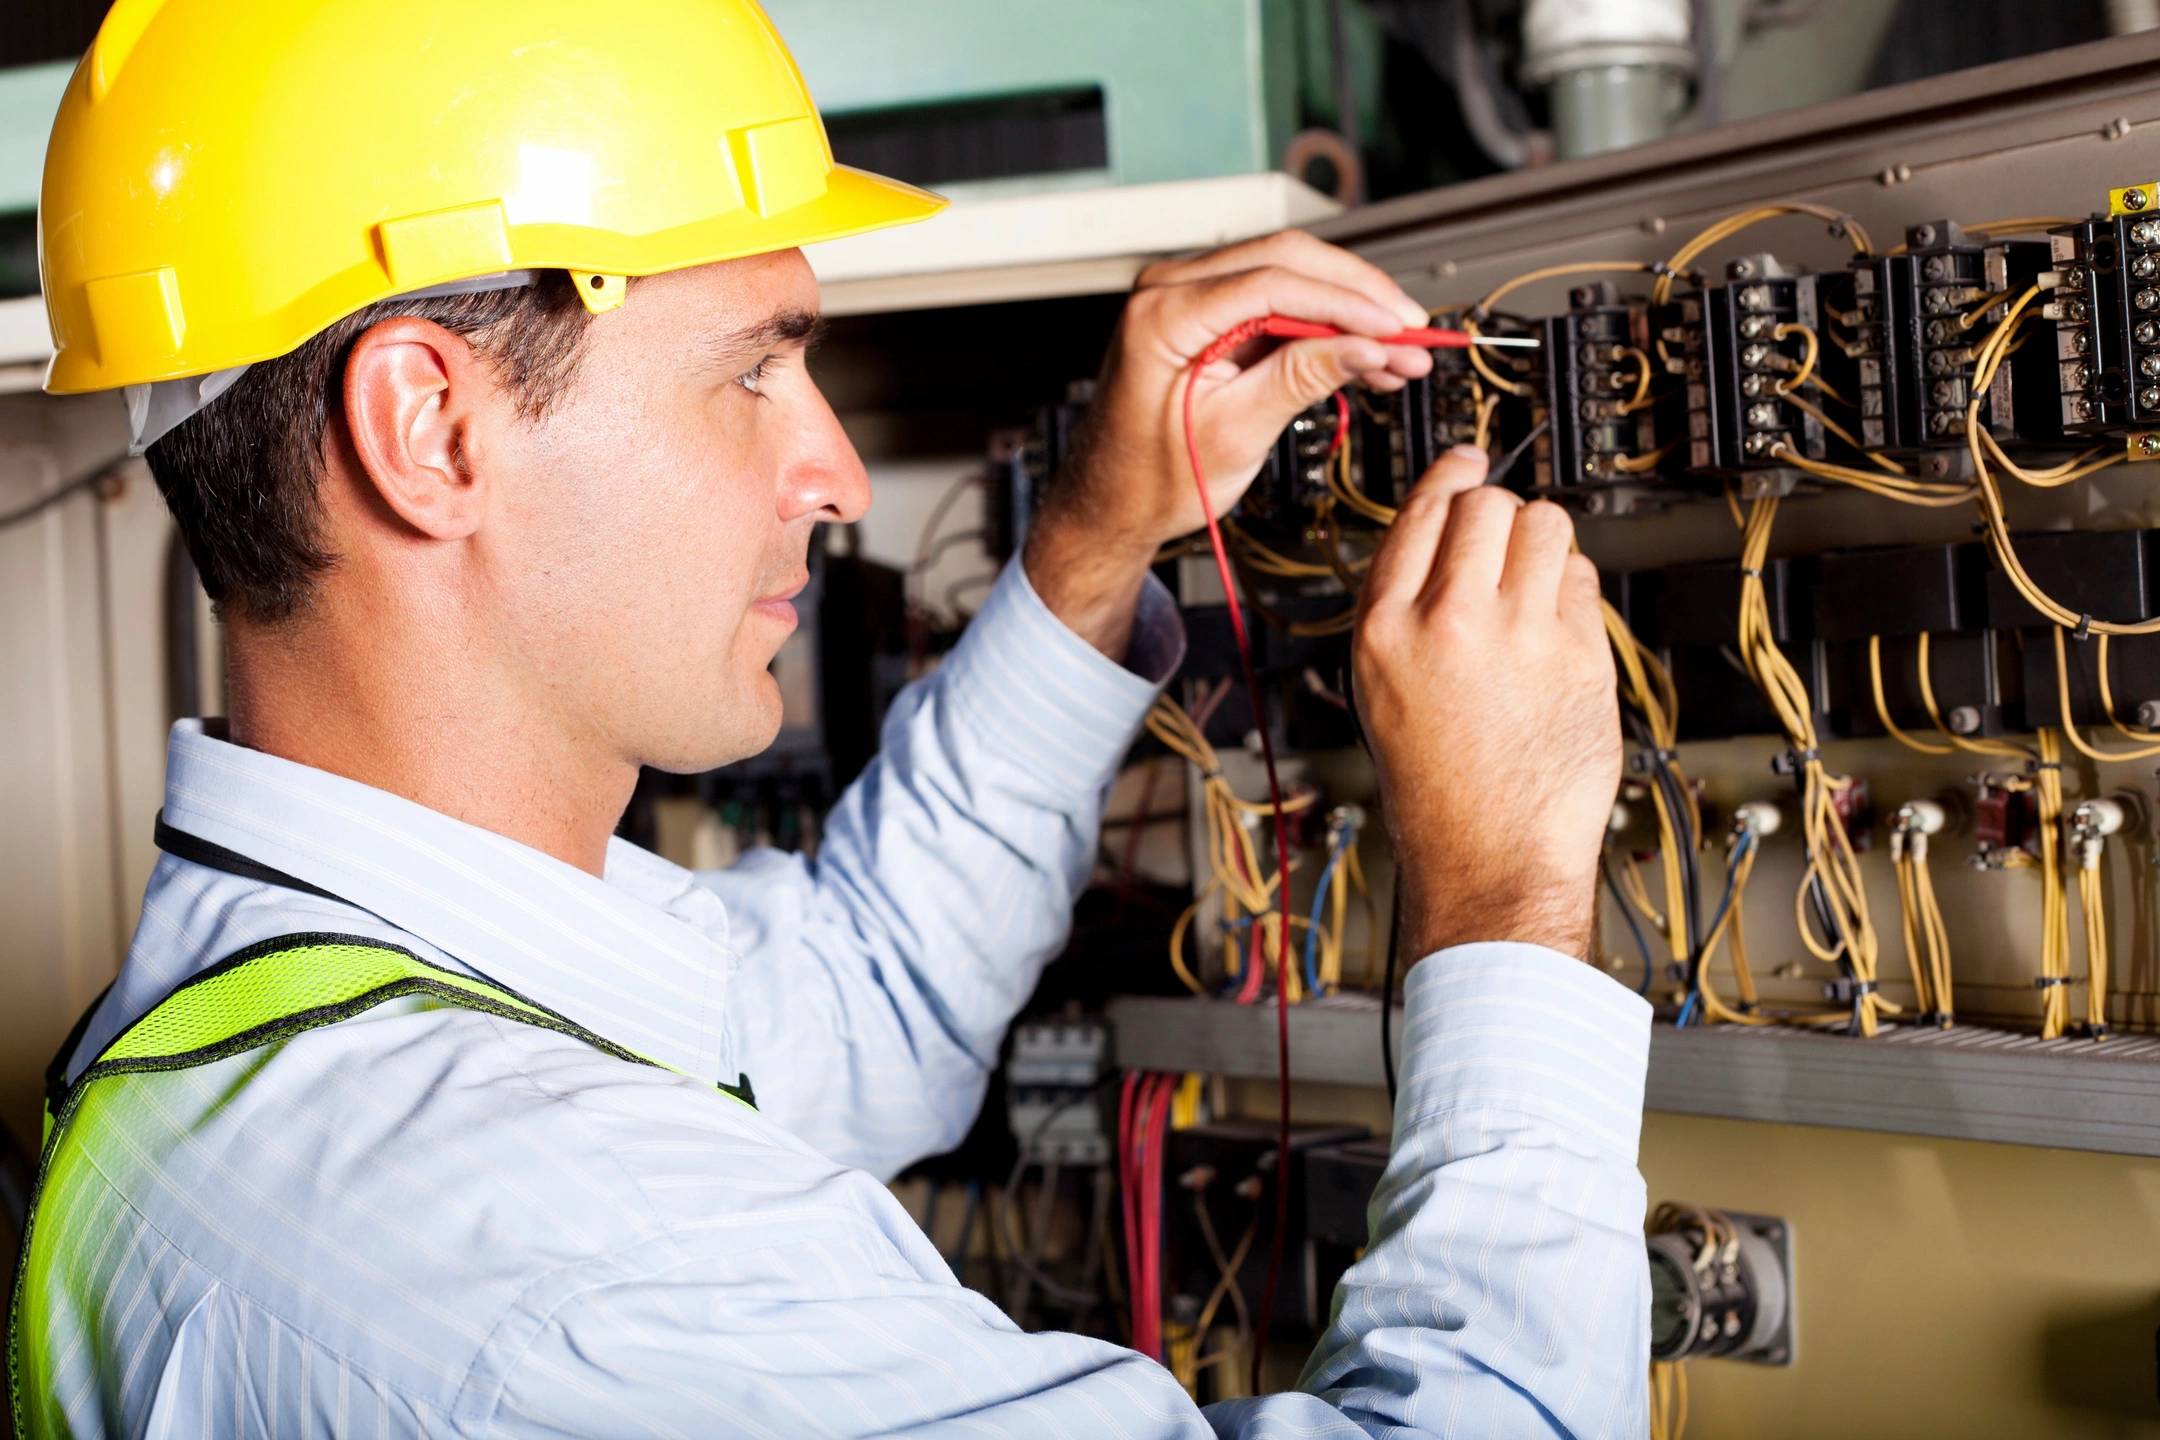 Inspection of a electric panel as required by law